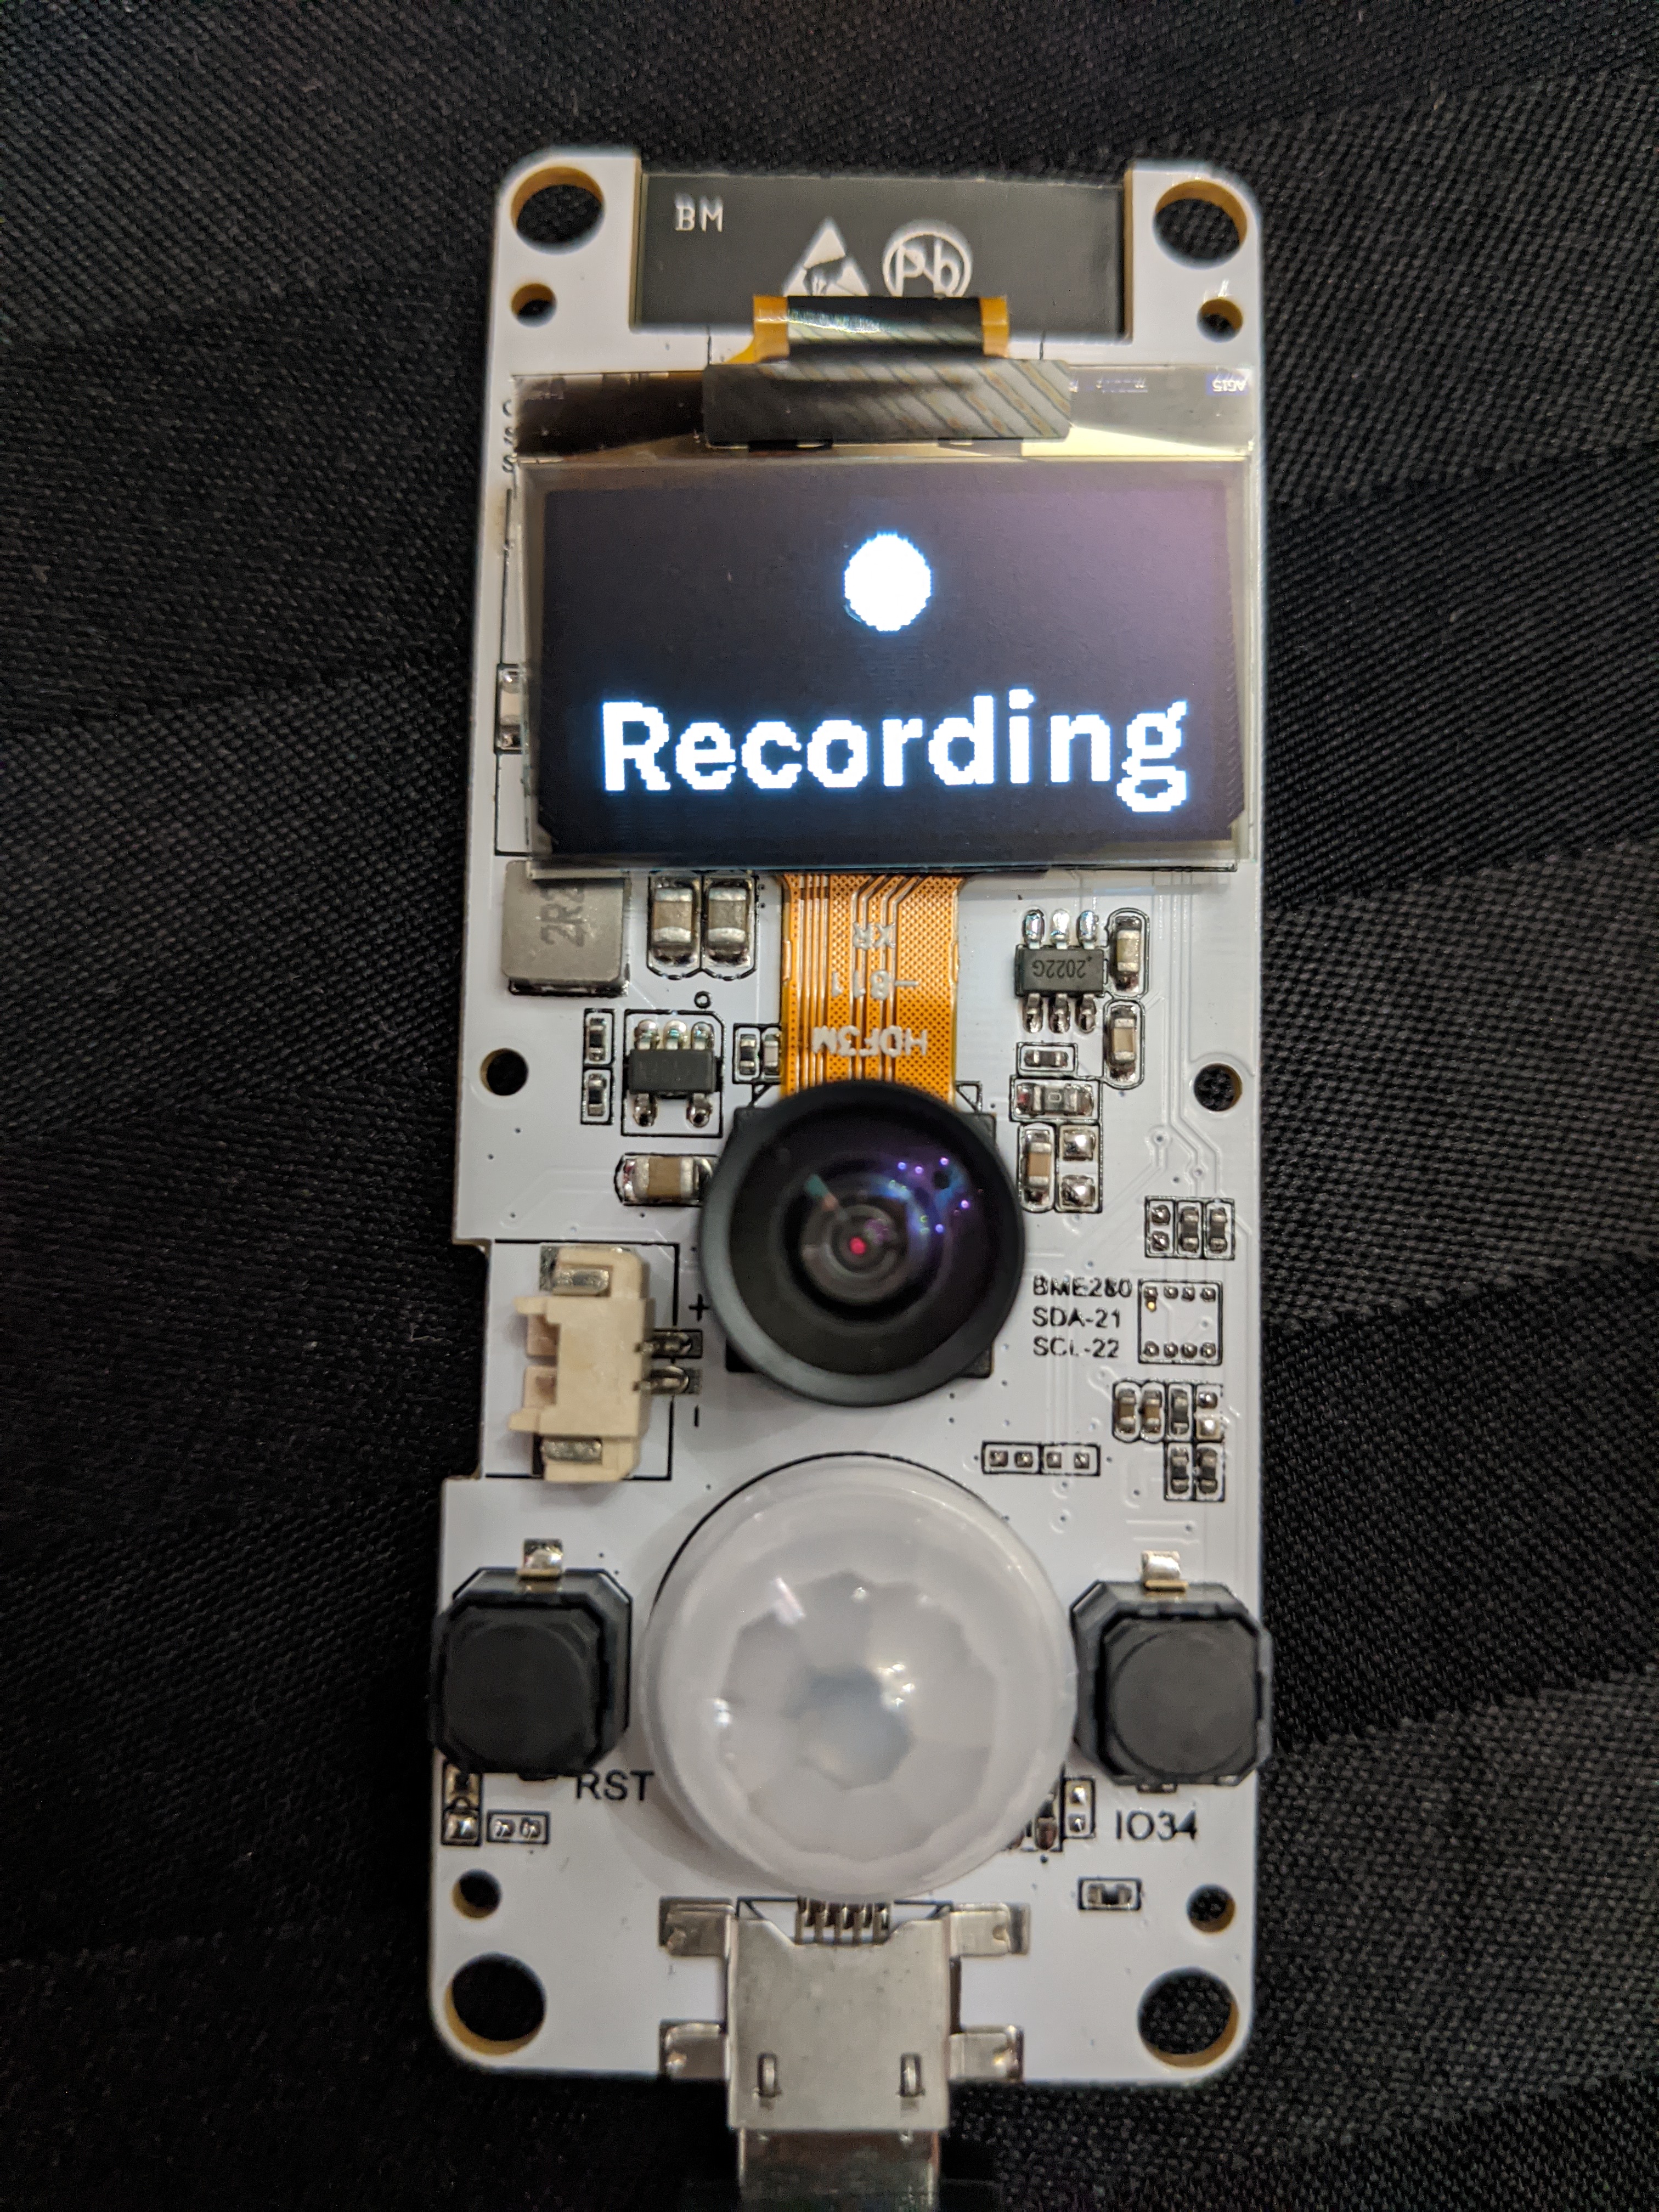 Doorbell activated and recording